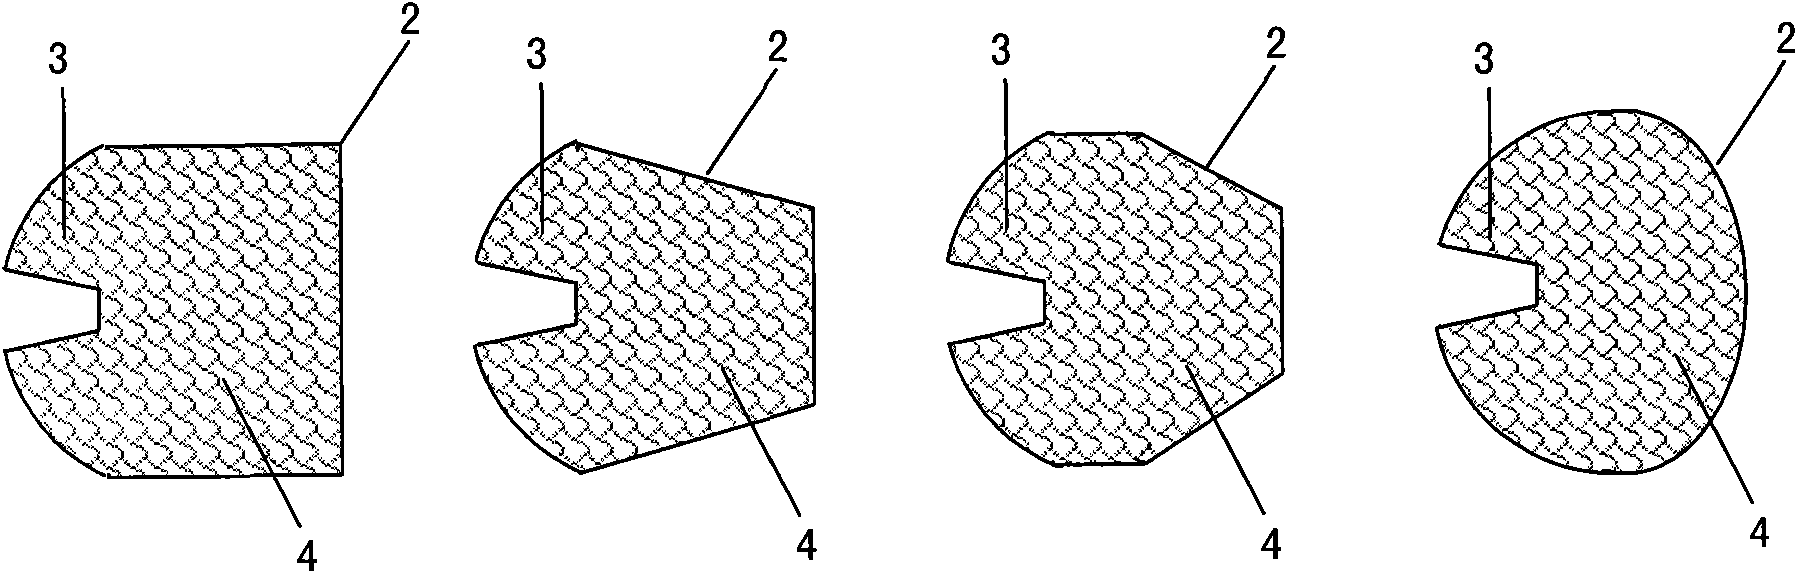 Anti-collision method of ship made of composite materials and hull structure